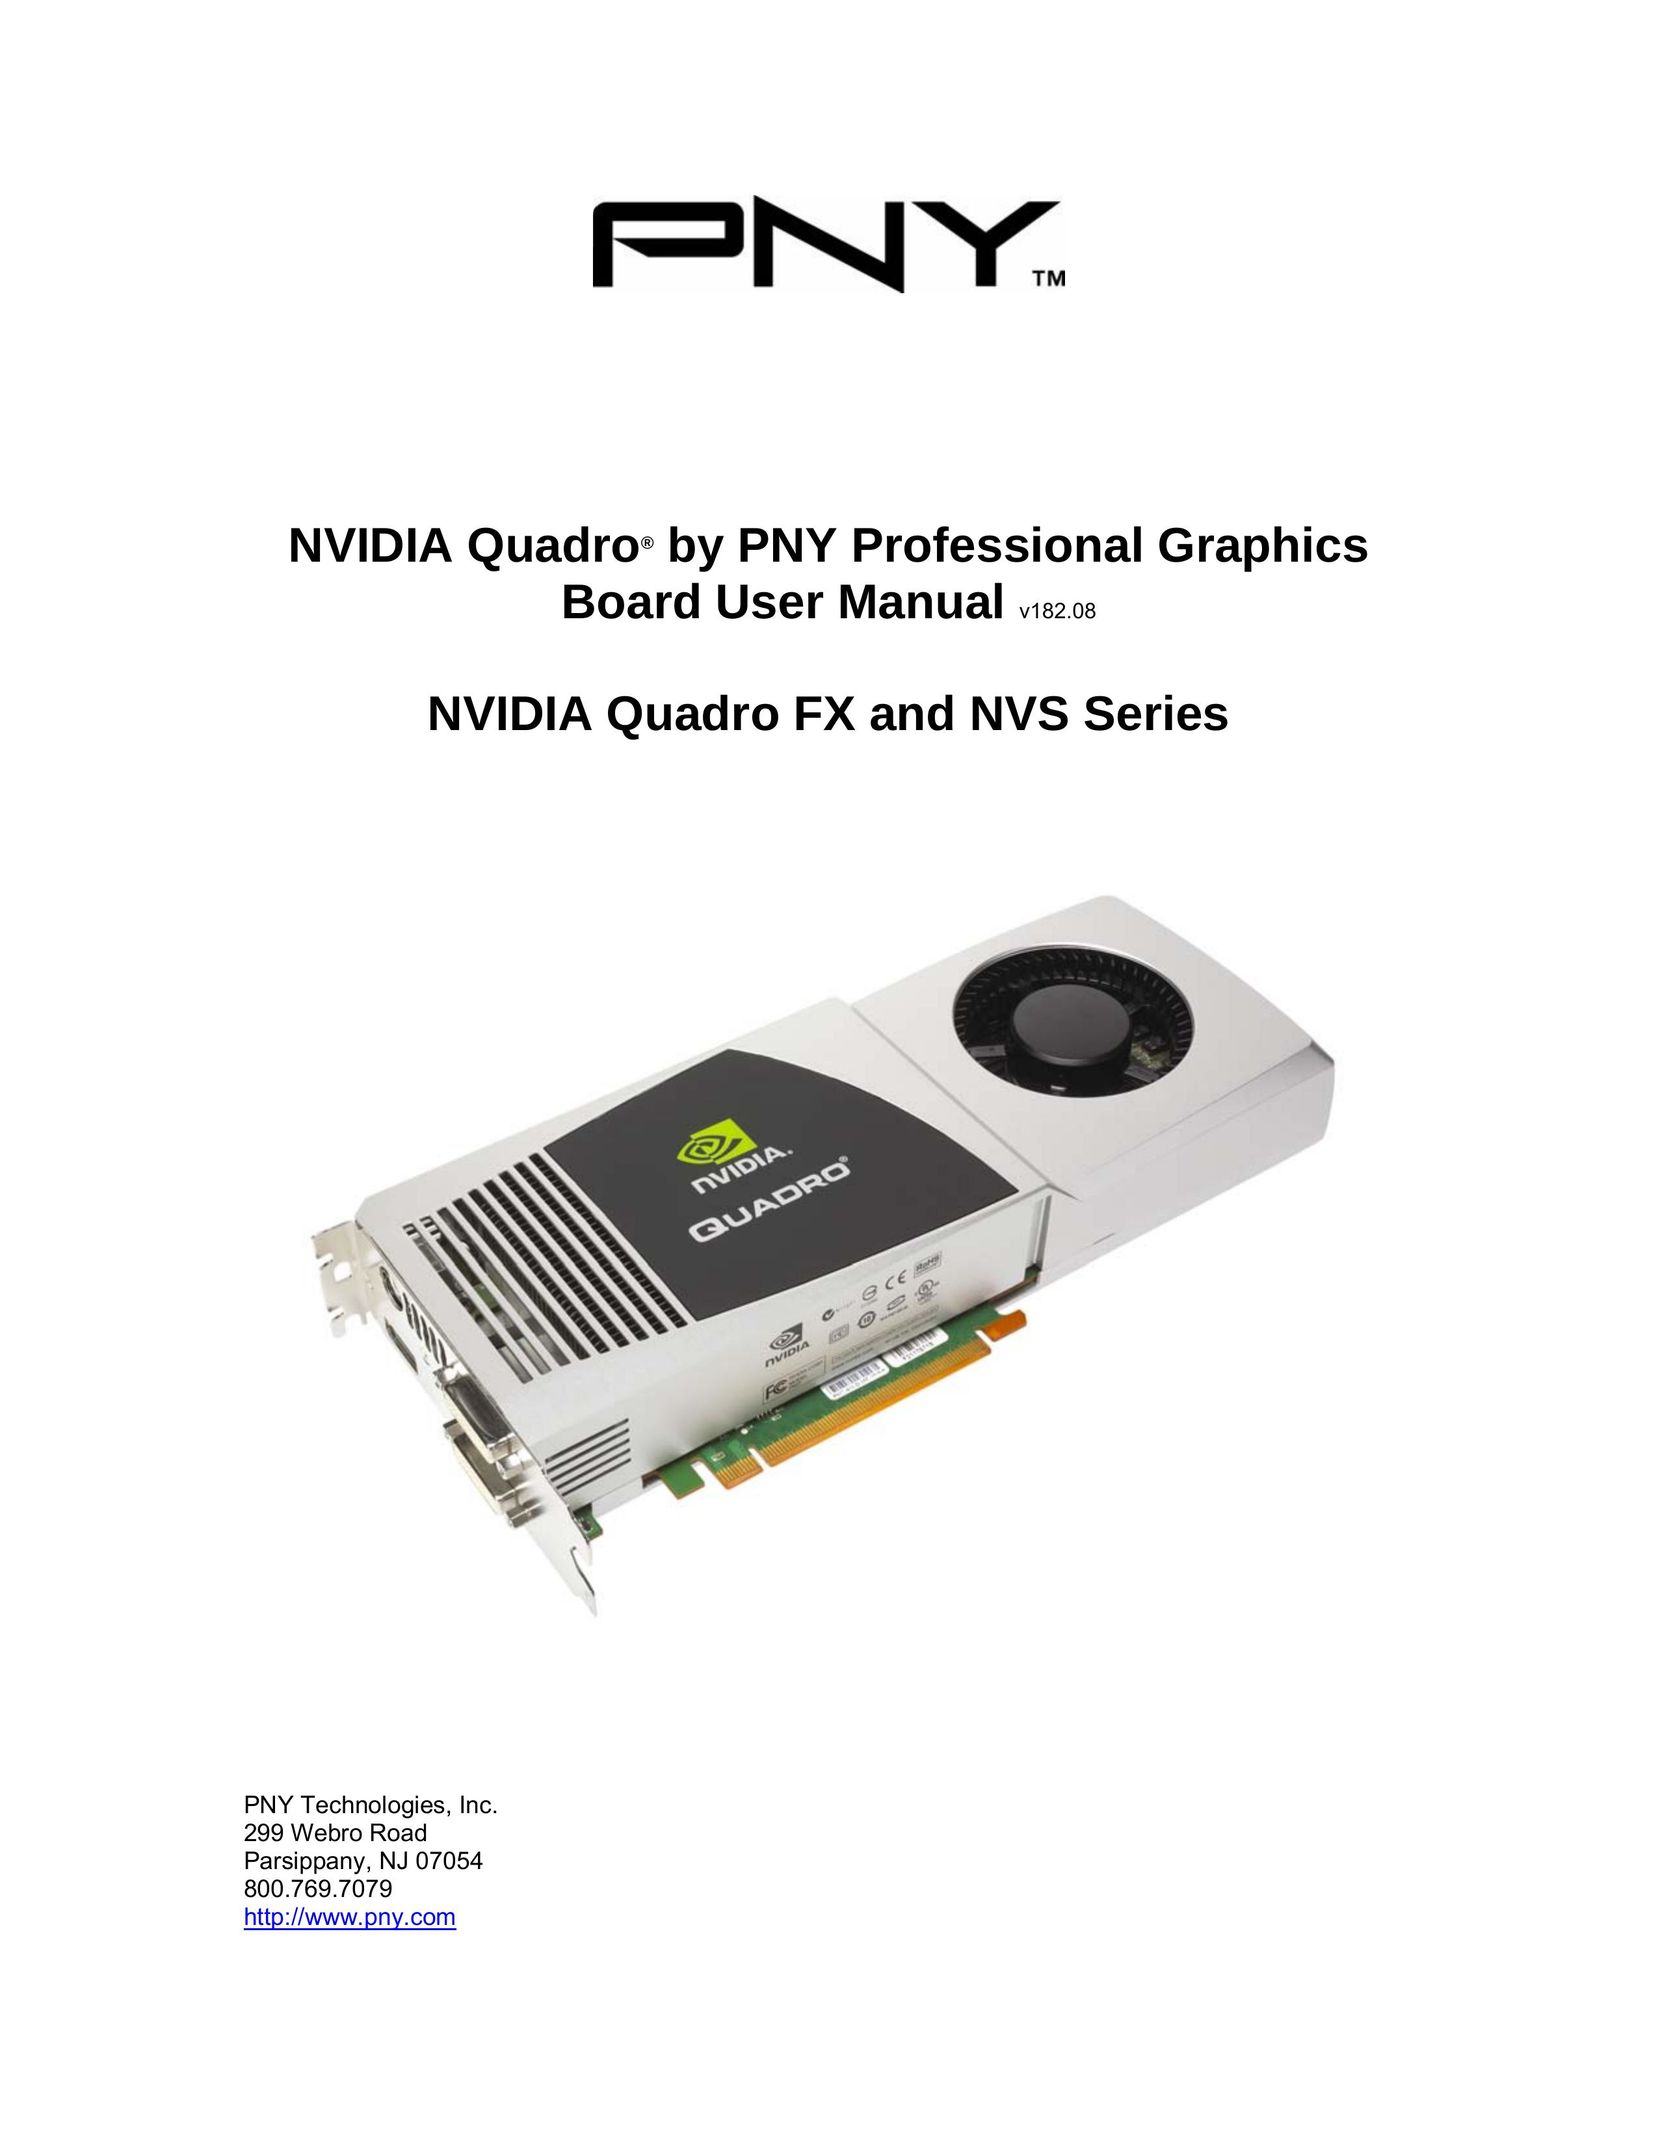 PNY FX 4800G Computer Hardware User Manual